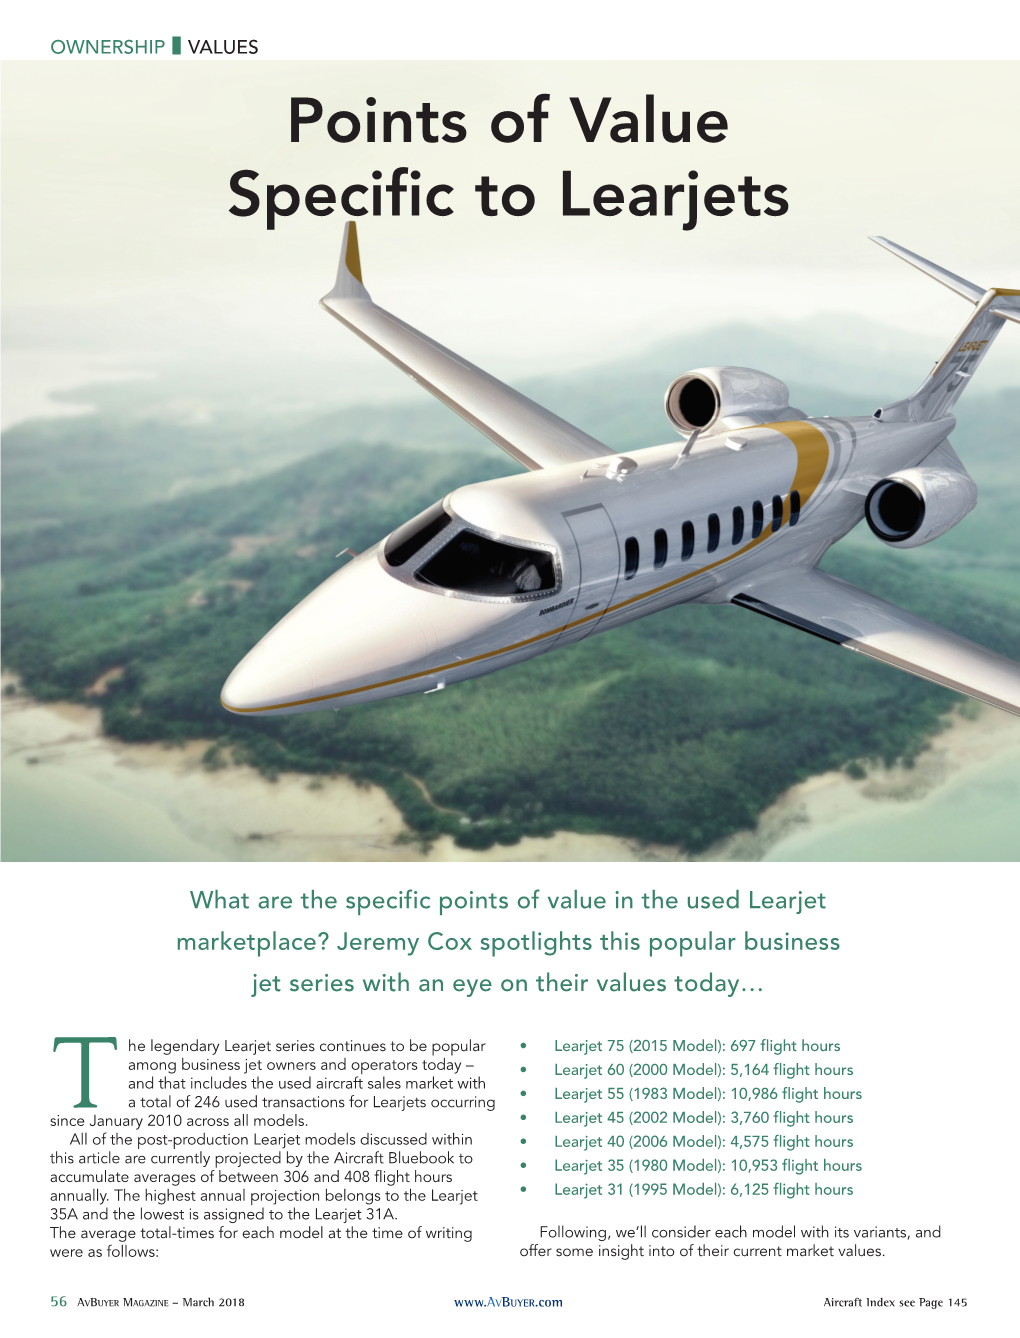 Points of Value Specific to Learjets